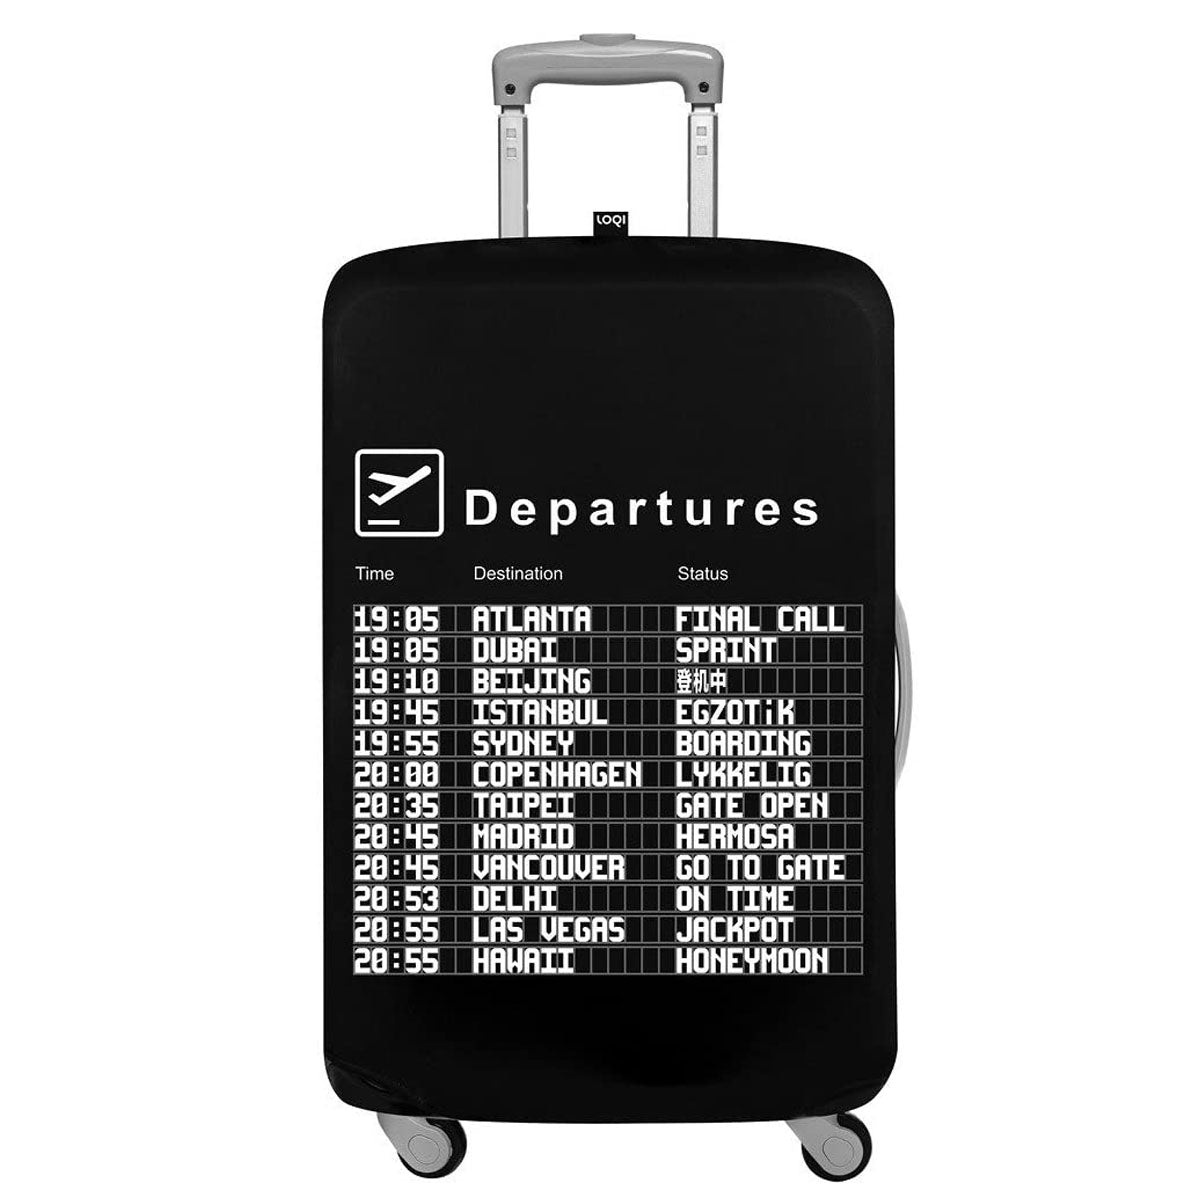 Luggage covers